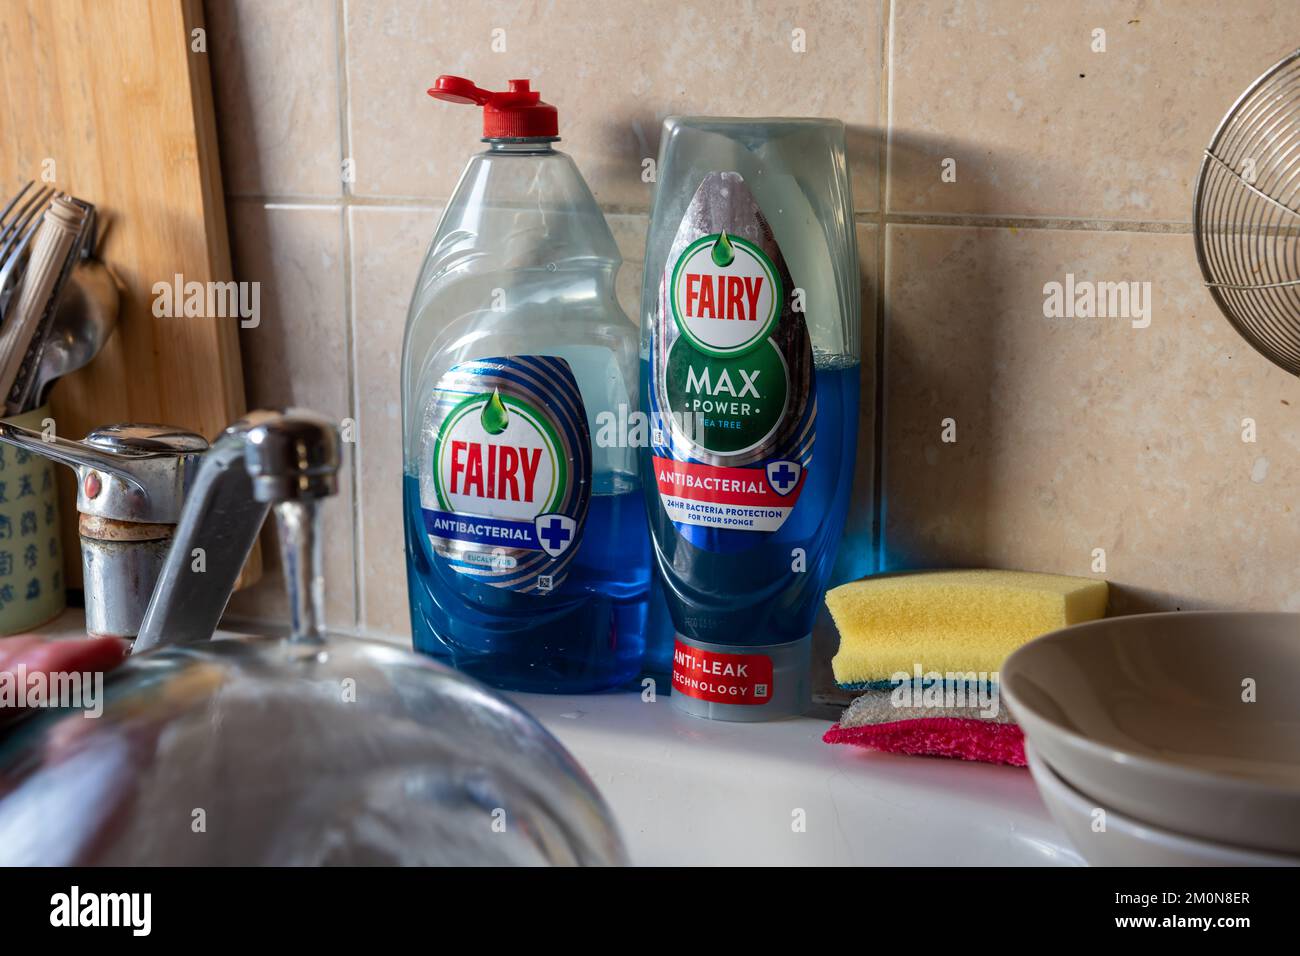 London. UK- 12.07.2022. A bottle of Fairy Max and Fairy antibacterial washing up liquid by a kitchen sink. Stock Photo